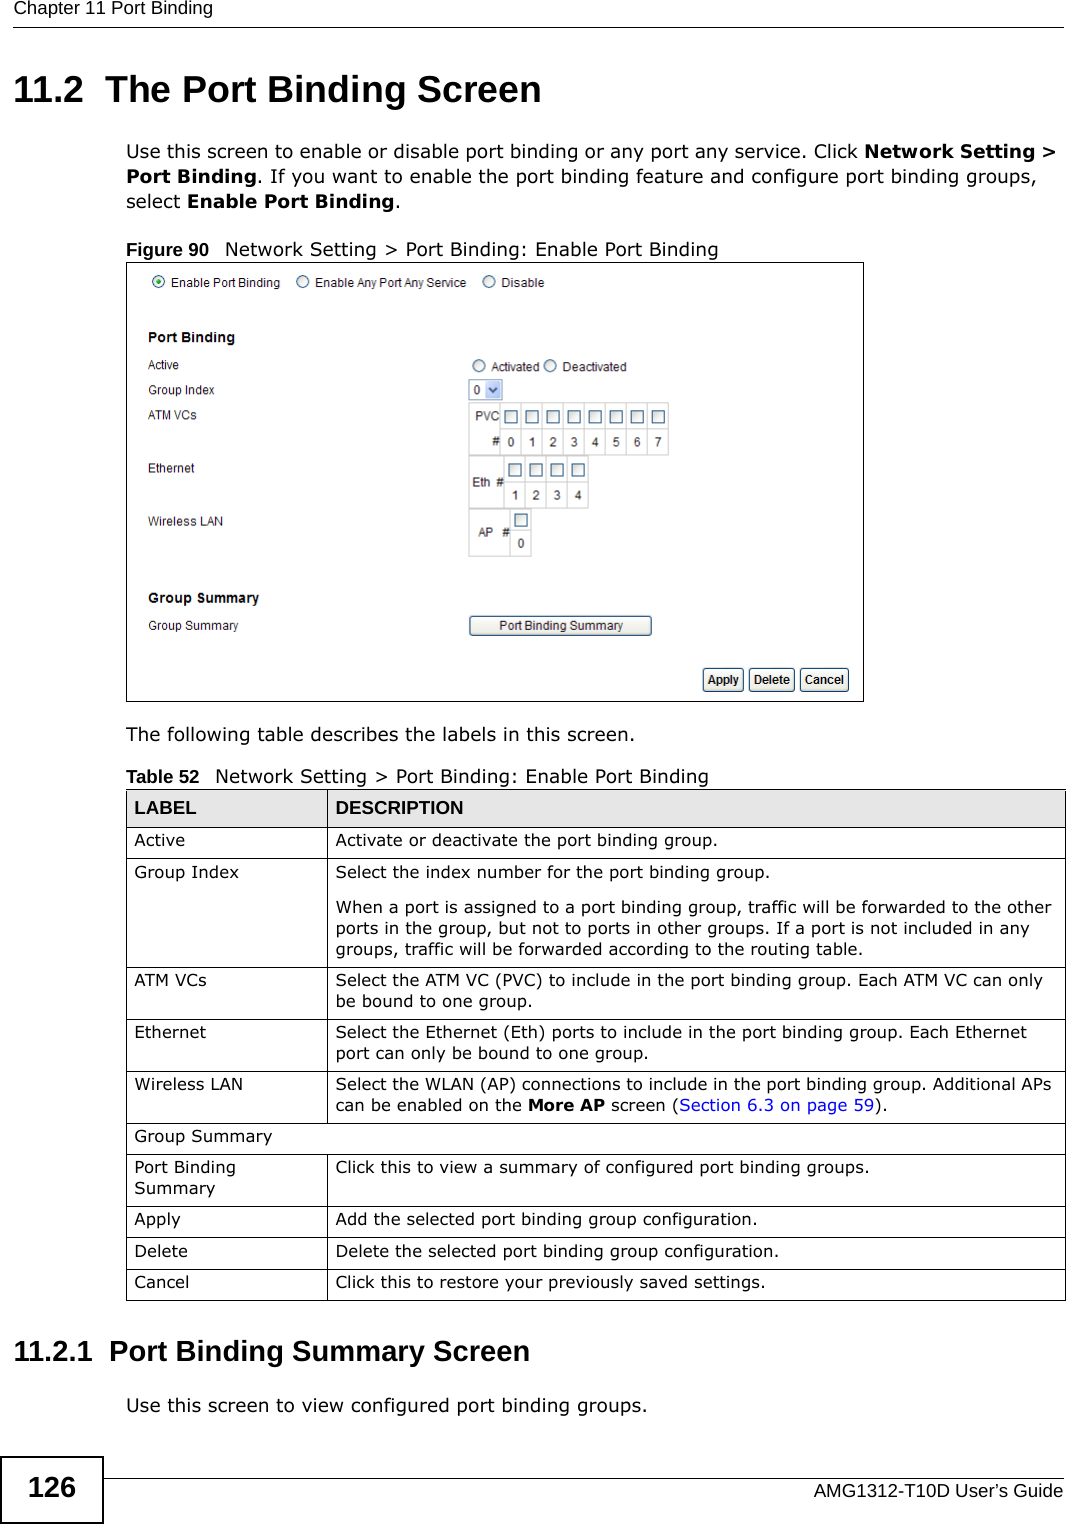 Chapter 11 Port BindingAMG1312-T10D User’s Guide12611.2  The Port Binding ScreenUse this screen to enable or disable port binding or any port any service. Click Network Setting &gt; Port Binding. If you want to enable the port binding feature and configure port binding groups, select Enable Port Binding. Figure 90   Network Setting &gt; Port Binding: Enable Port BindingThe following table describes the labels in this screen. 11.2.1  Port Binding Summary ScreenUse this screen to view configured port binding groups.Table 52   Network Setting &gt; Port Binding: Enable Port BindingLABEL DESCRIPTIONActive Activate or deactivate the port binding group.Group Index Select the index number for the port binding group. When a port is assigned to a port binding group, traffic will be forwarded to the other ports in the group, but not to ports in other groups. If a port is not included in any groups, traffic will be forwarded according to the routing table.ATM VCs Select the ATM VC (PVC) to include in the port binding group. Each ATM VC can only be bound to one group.Ethernet Select the Ethernet (Eth) ports to include in the port binding group. Each Ethernet port can only be bound to one group.Wireless LAN Select the WLAN (AP) connections to include in the port binding group. Additional APs can be enabled on the More AP screen (Section 6.3 on page 59).Group SummaryPort Binding SummaryClick this to view a summary of configured port binding groups.Apply Add the selected port binding group configuration.Delete Delete the selected port binding group configuration. Cancel Click this to restore your previously saved settings.